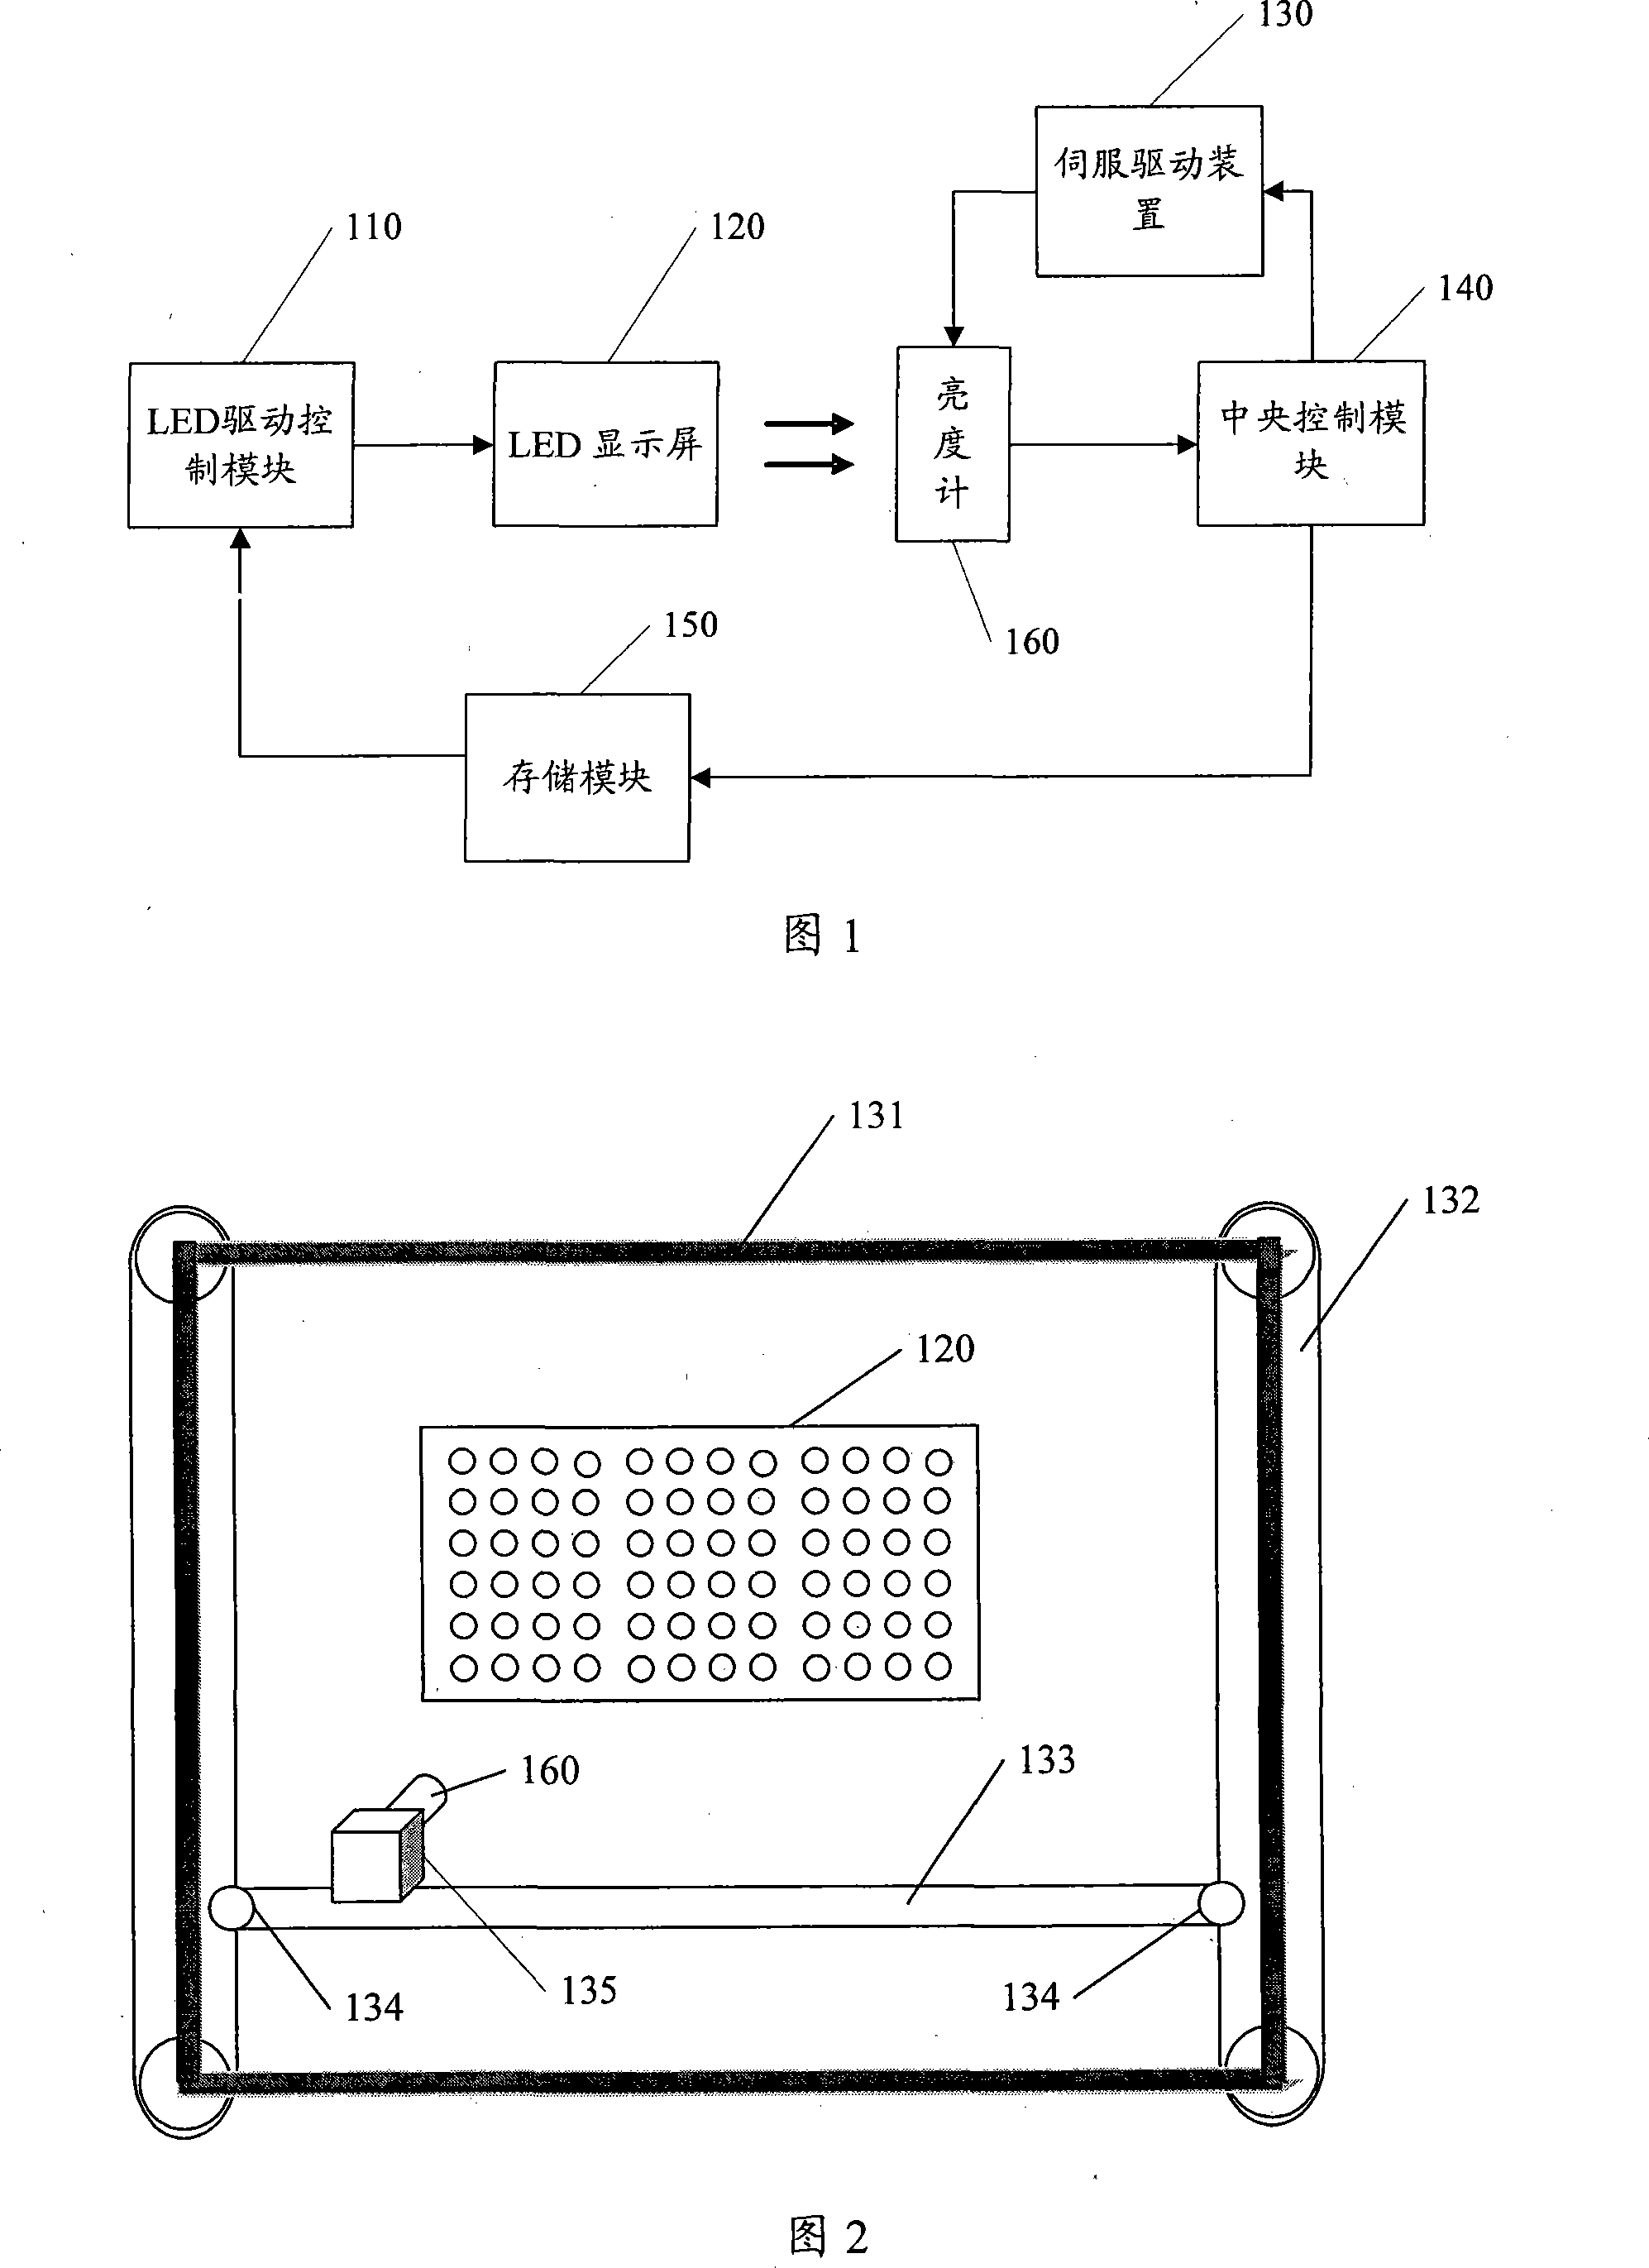 System and method for obtaining gamma correction data point-to-point as well as application system thereof